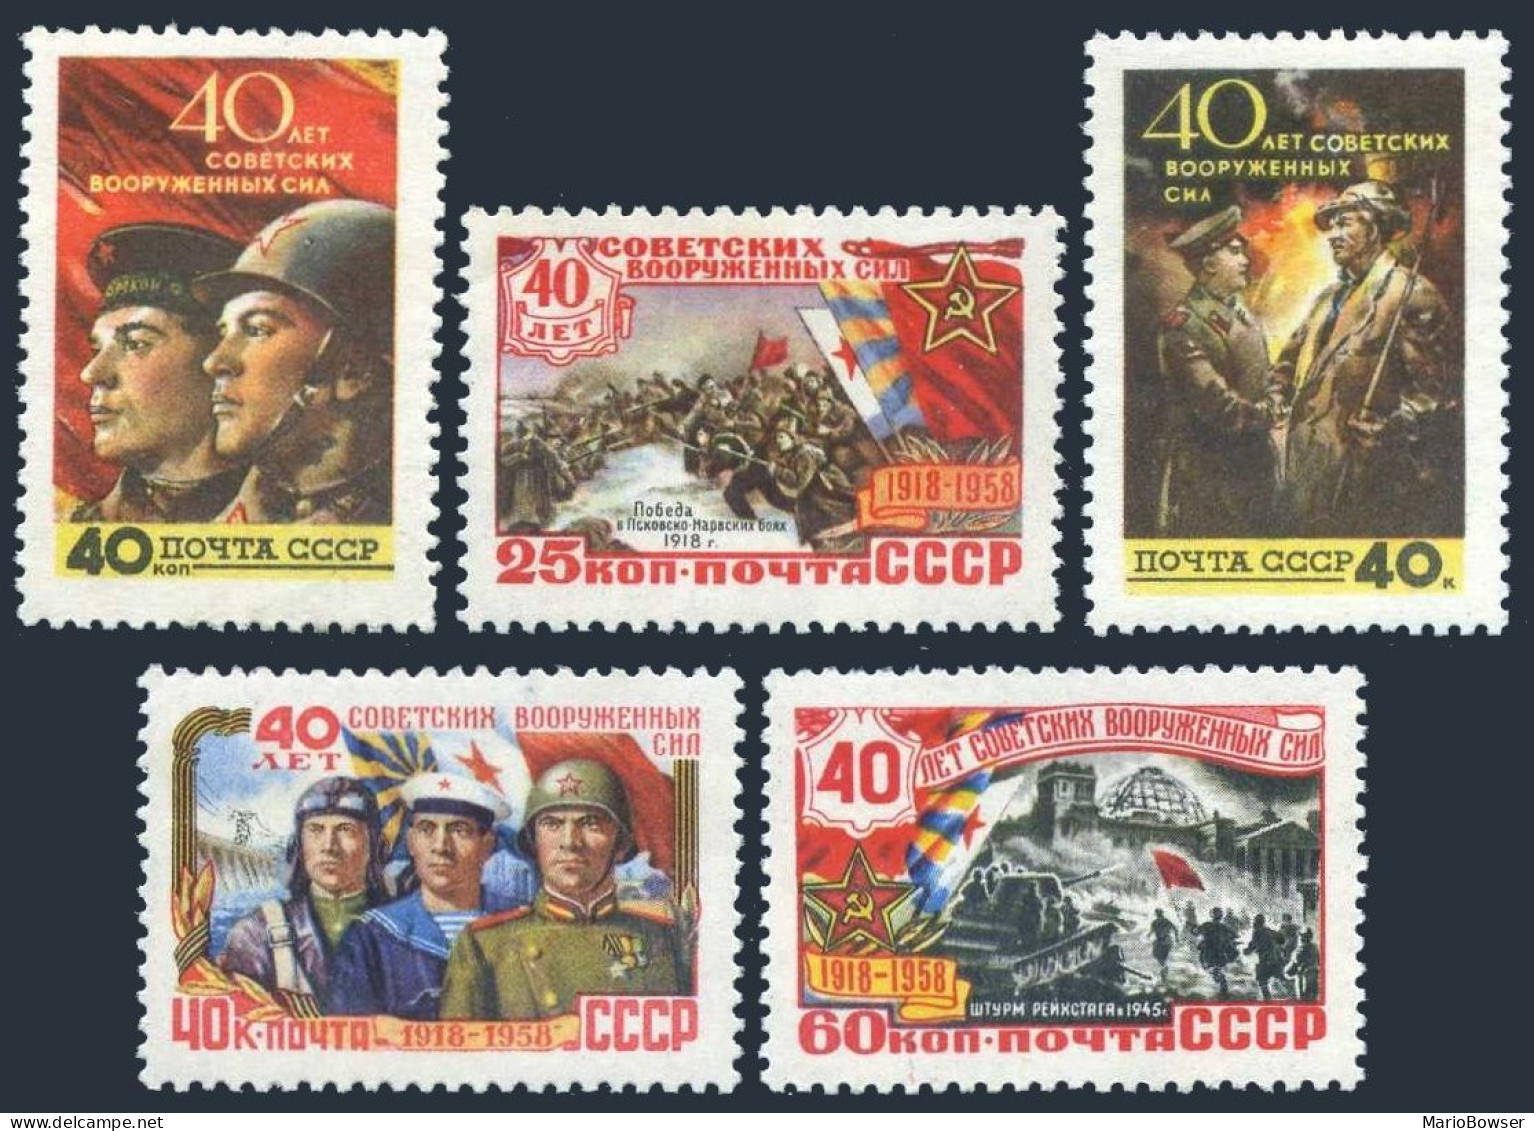 Russia 2039-2043,MNH.Michel 2053-2057. Soviet-Red Army,40th Ann.WW II Events. - Unused Stamps